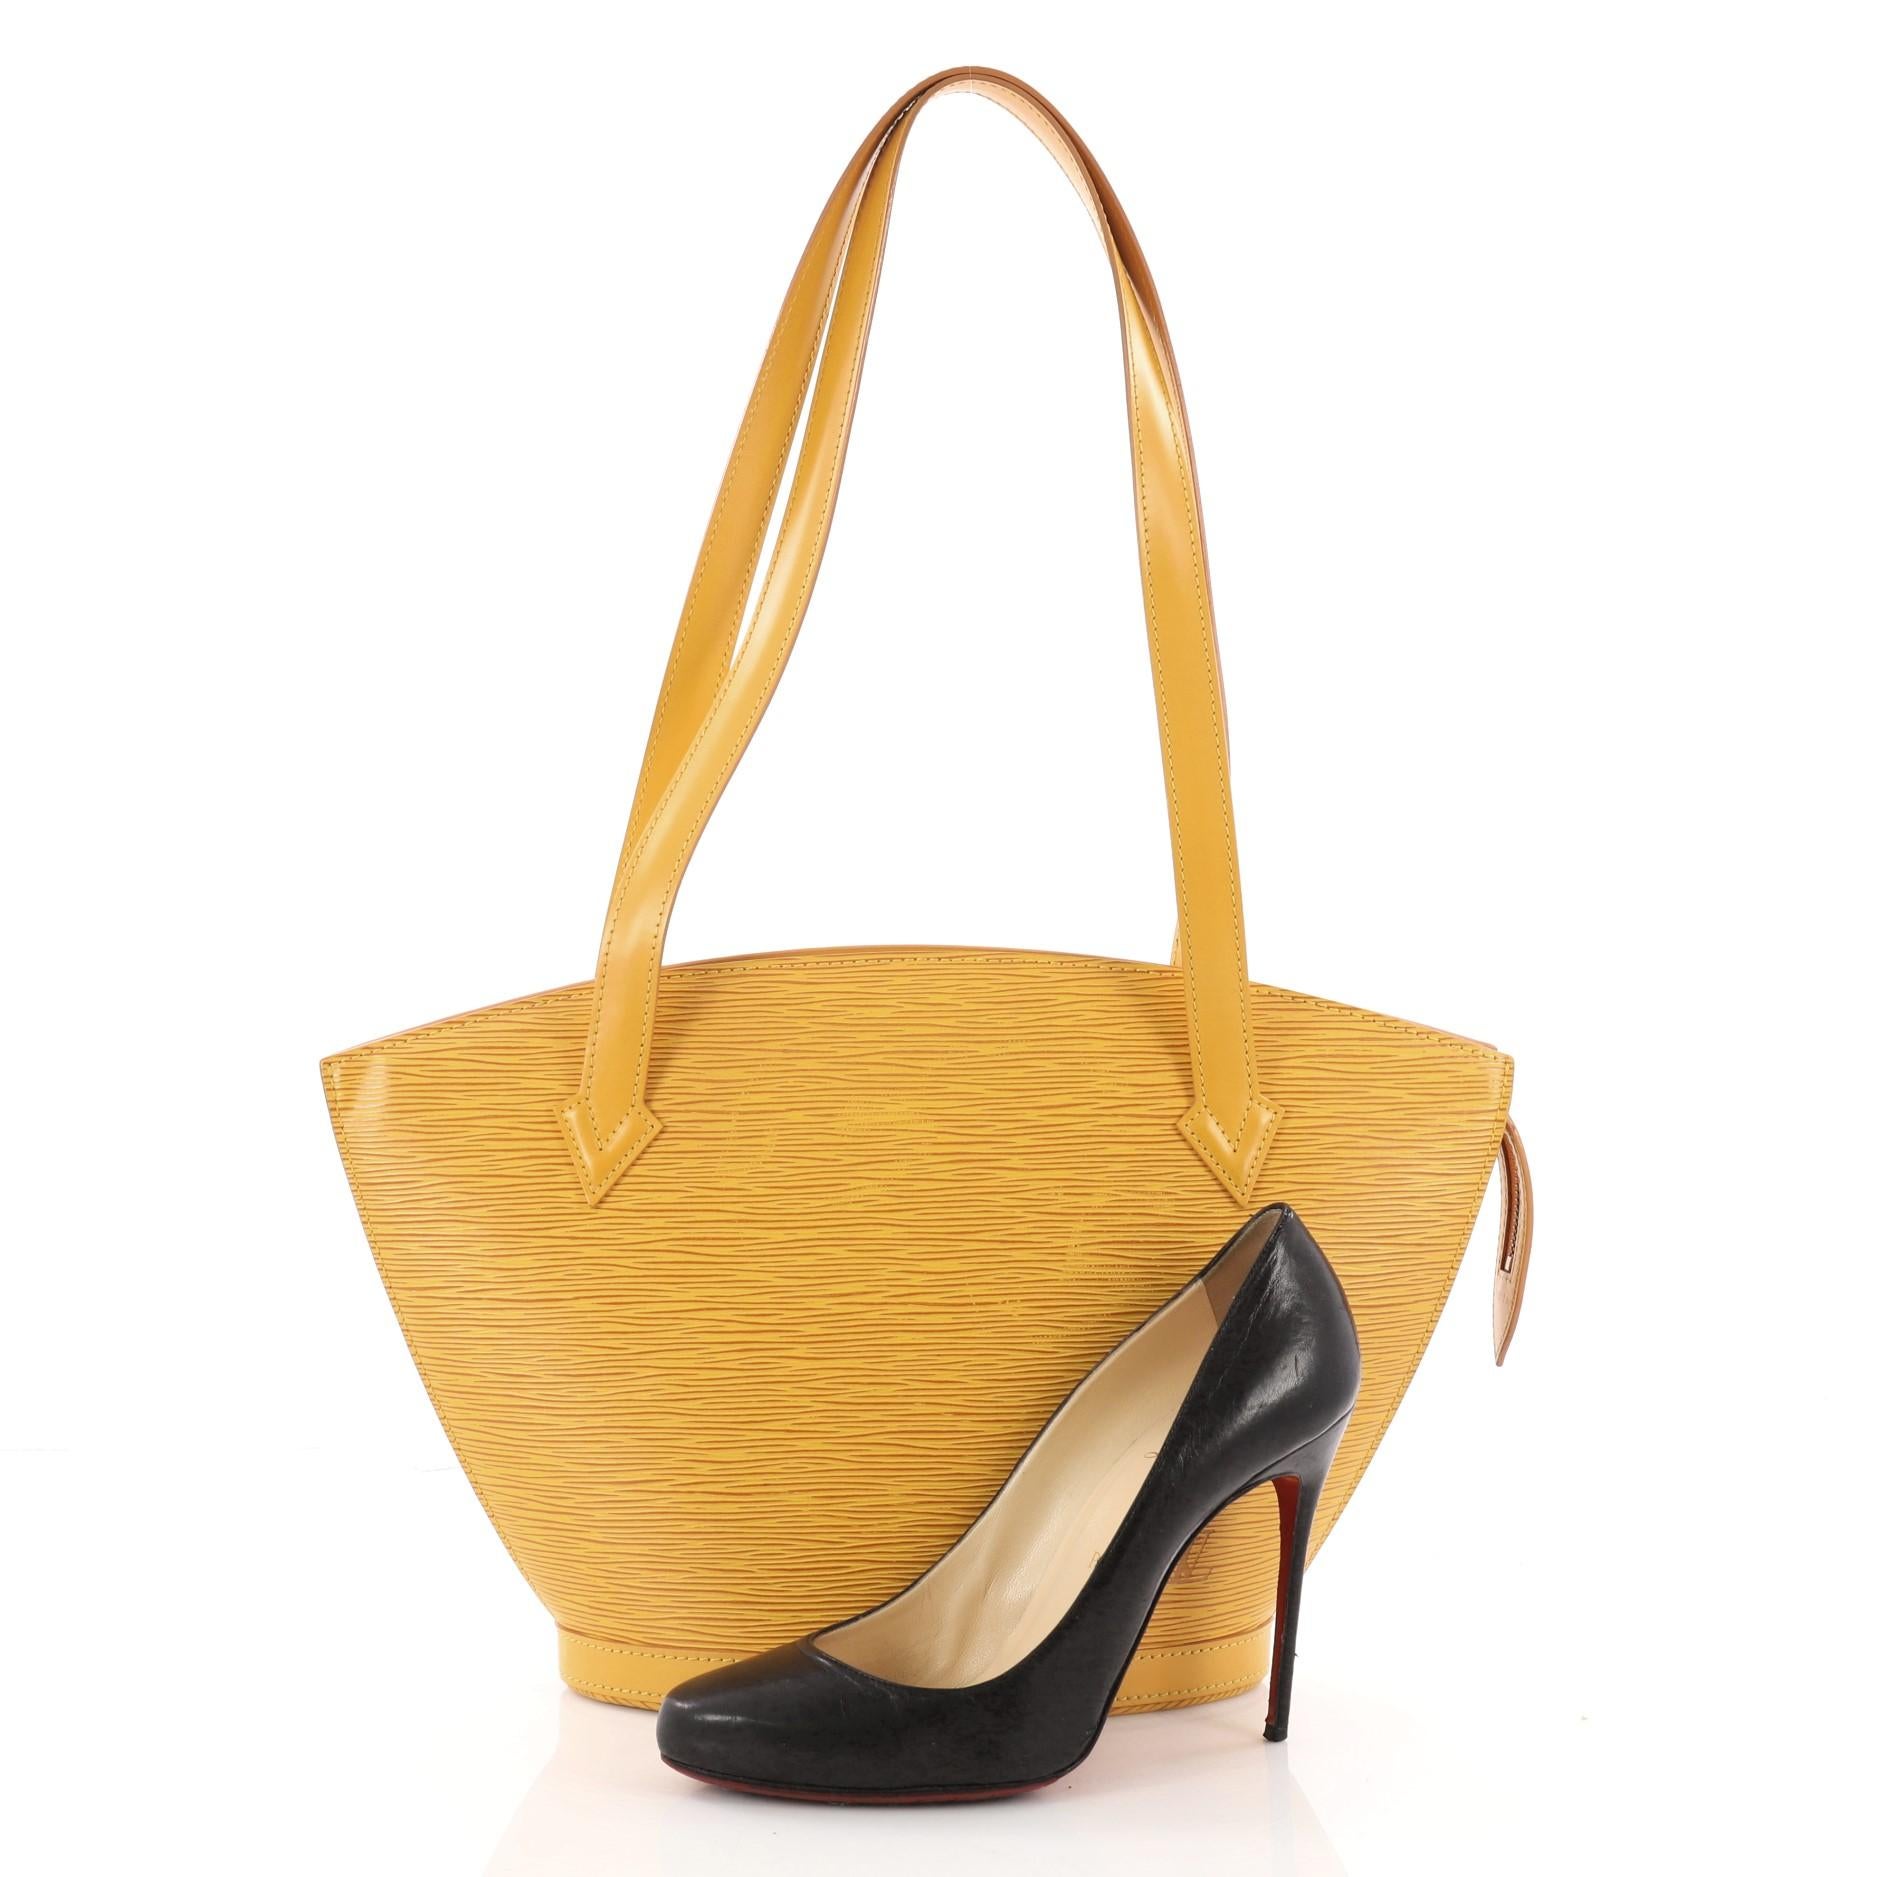 This authentic Louis Vuitton Saint Jacques Handbag Epi Leather PM is refined and elegant. Crafted from yellow epi leather, this fan-shaped slim shoulder bag features long straps, subtle LV logo at the front and a gold-tone hardware accents. Its zip